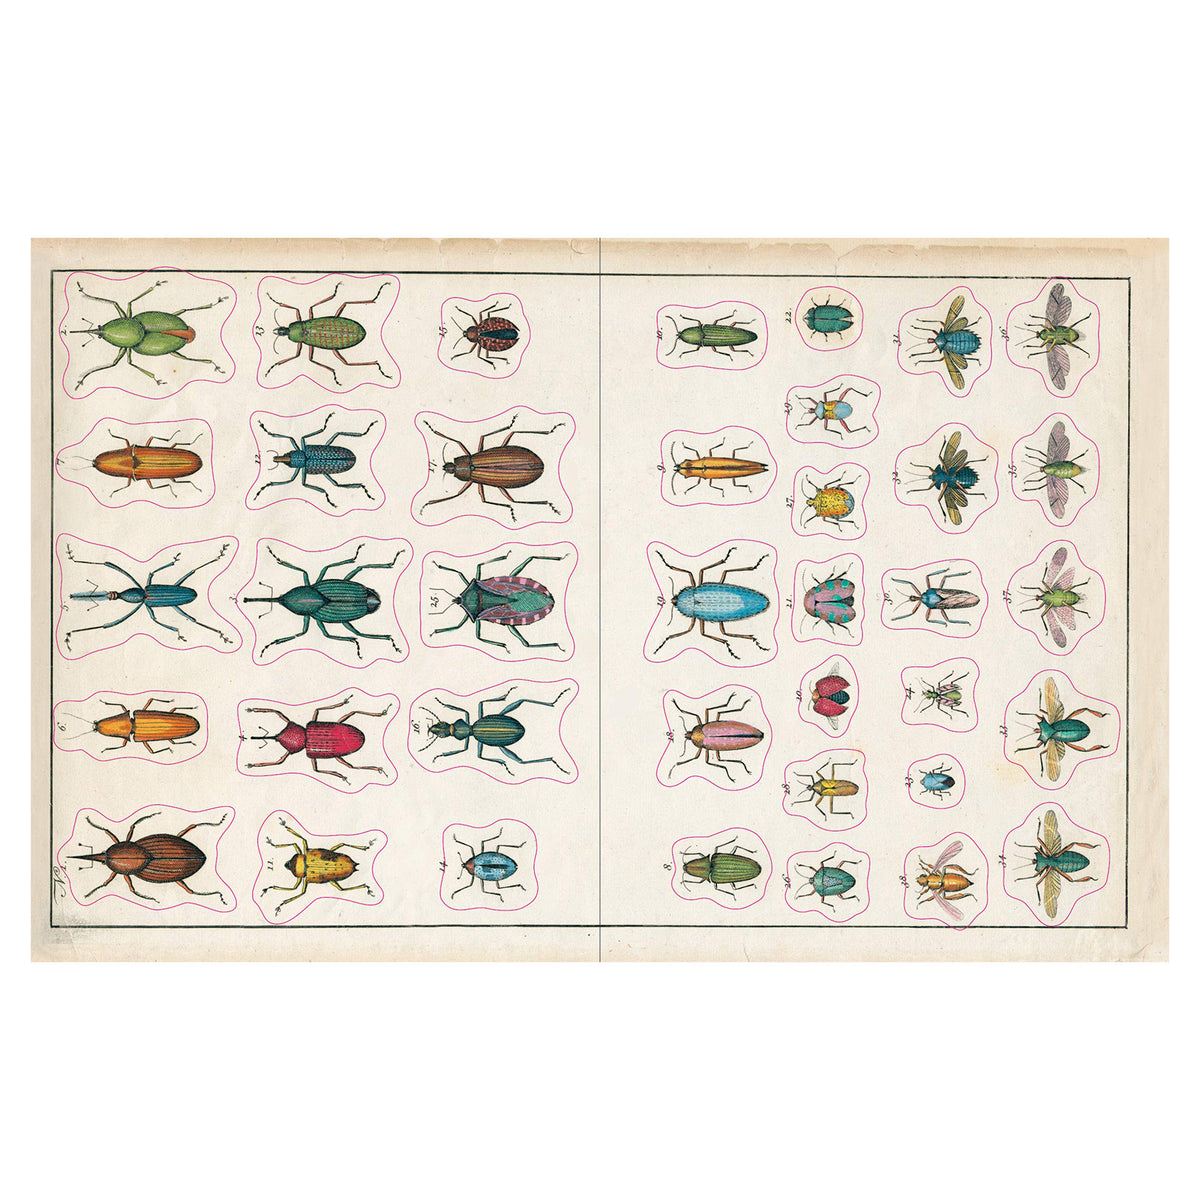 John Derian Sticker Book&#39;s insect sticker pages.